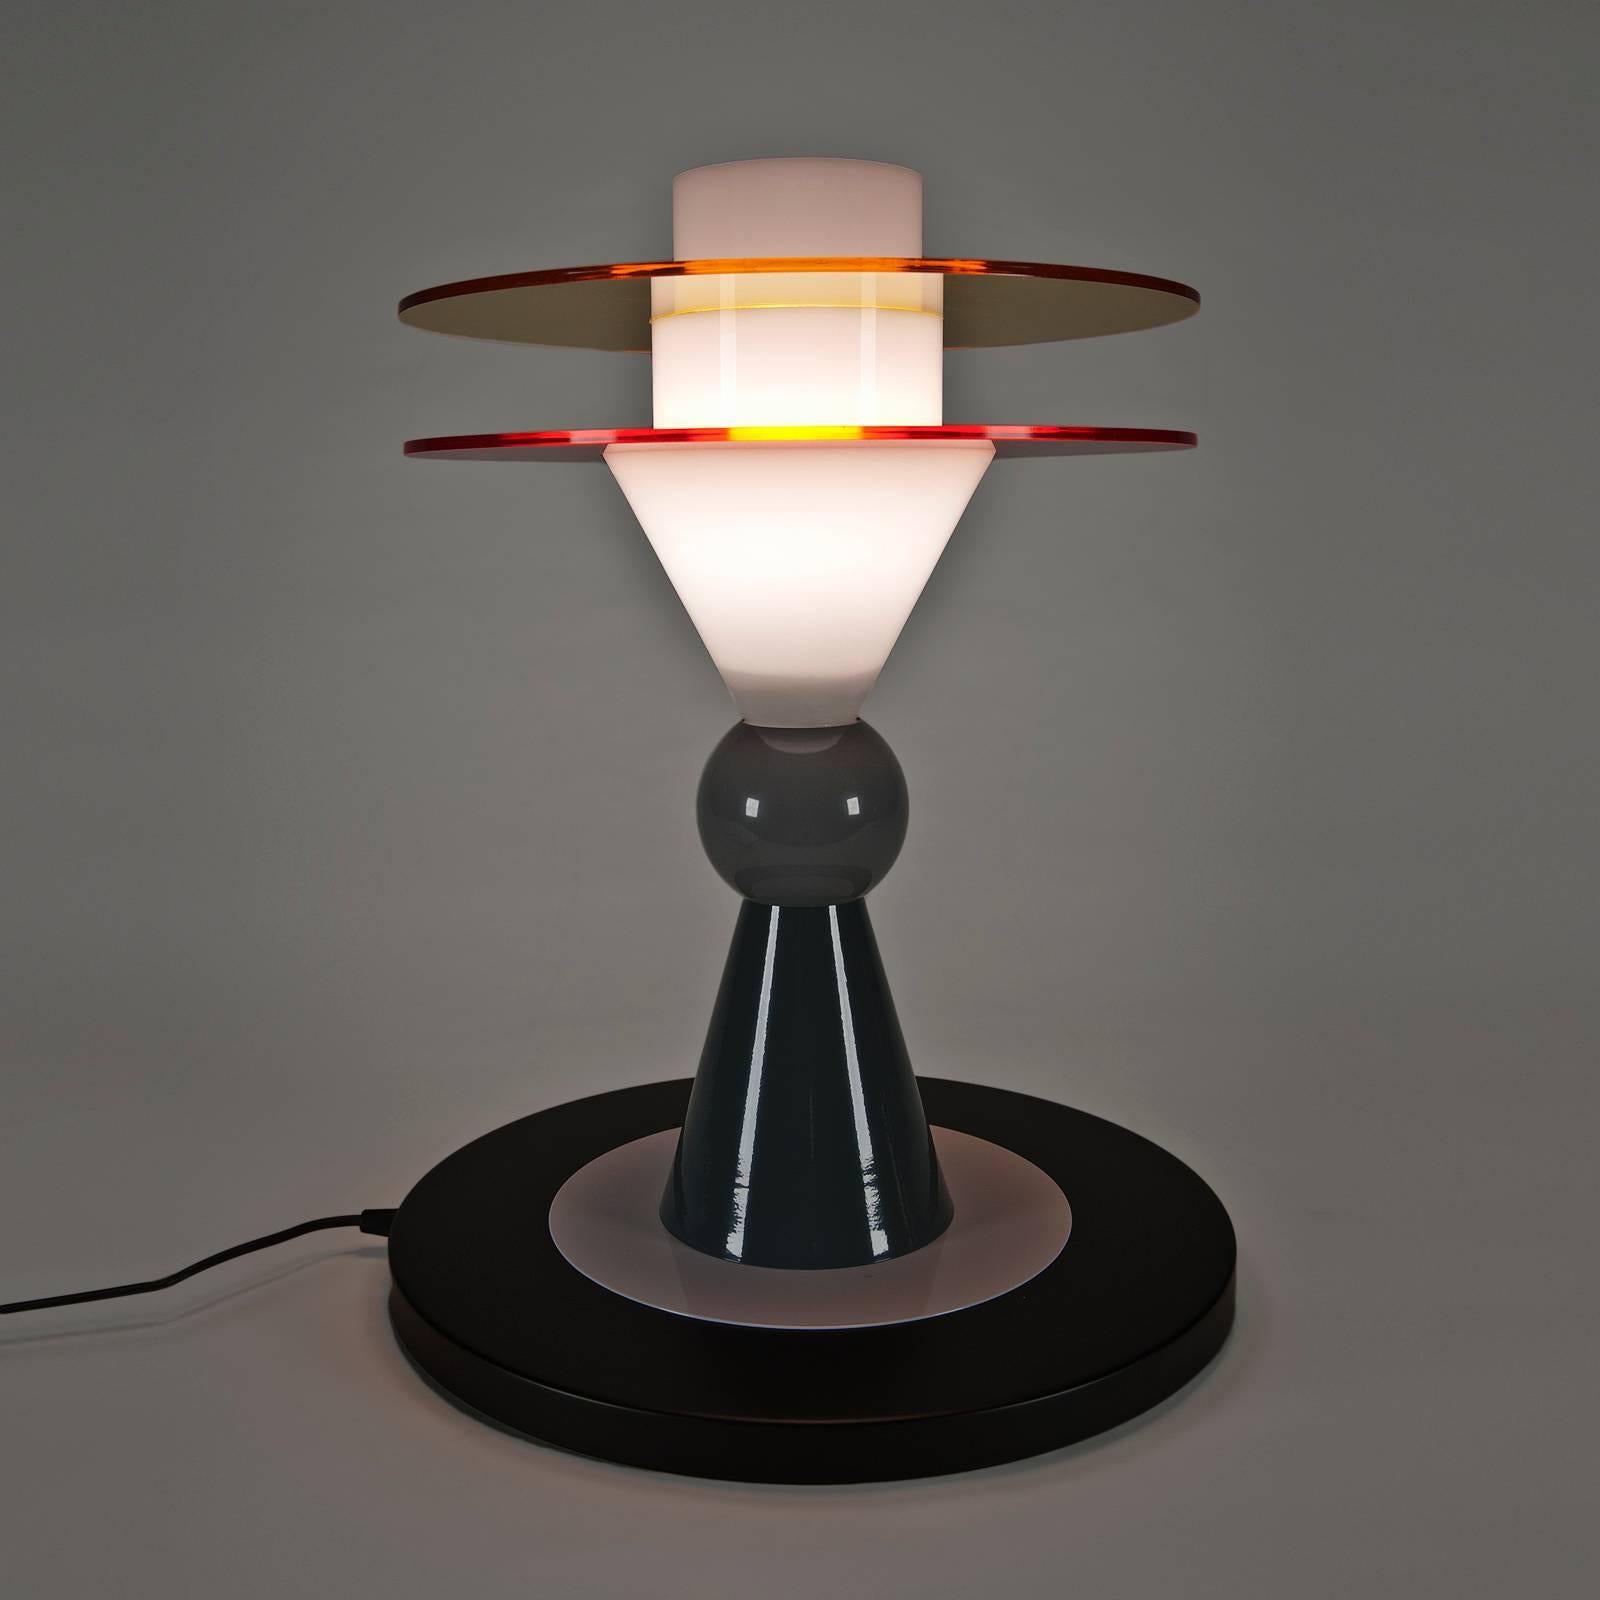 Ettore Sottsass, the founder of Memphis, designed this lamp for the Memphis 1983 collection. This example from 2010-2015 production. Includes bulb (1- 42w, E27 base, 230v - 50 HZ). Black electrical cord. Memphis identification tag on back of base.